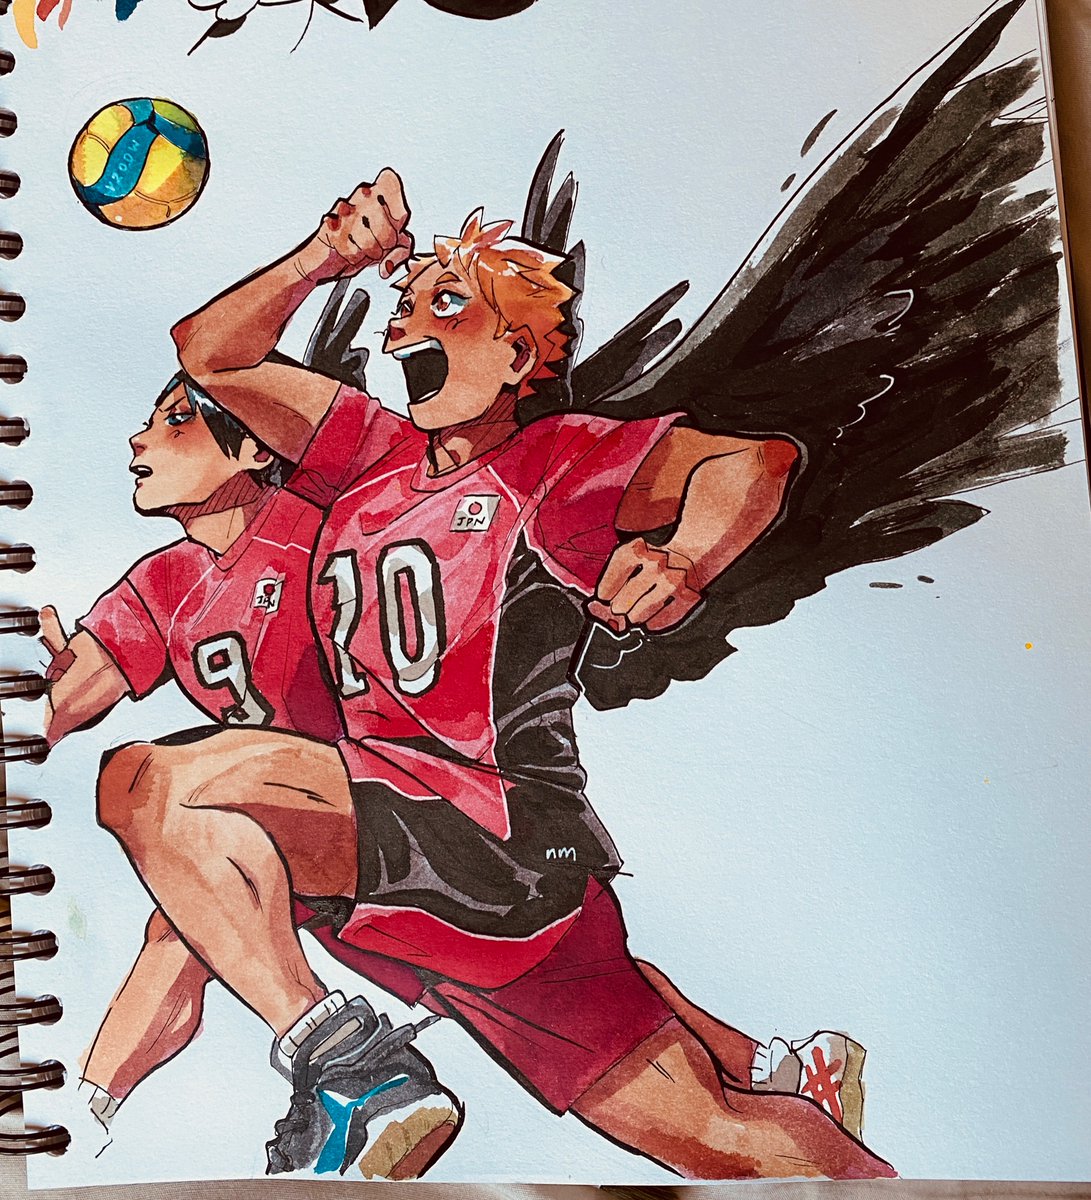 From now onwards to forever, the greatest allies! 

This one's for you kagehina nation, even i couldnt resist haikyuu 45 